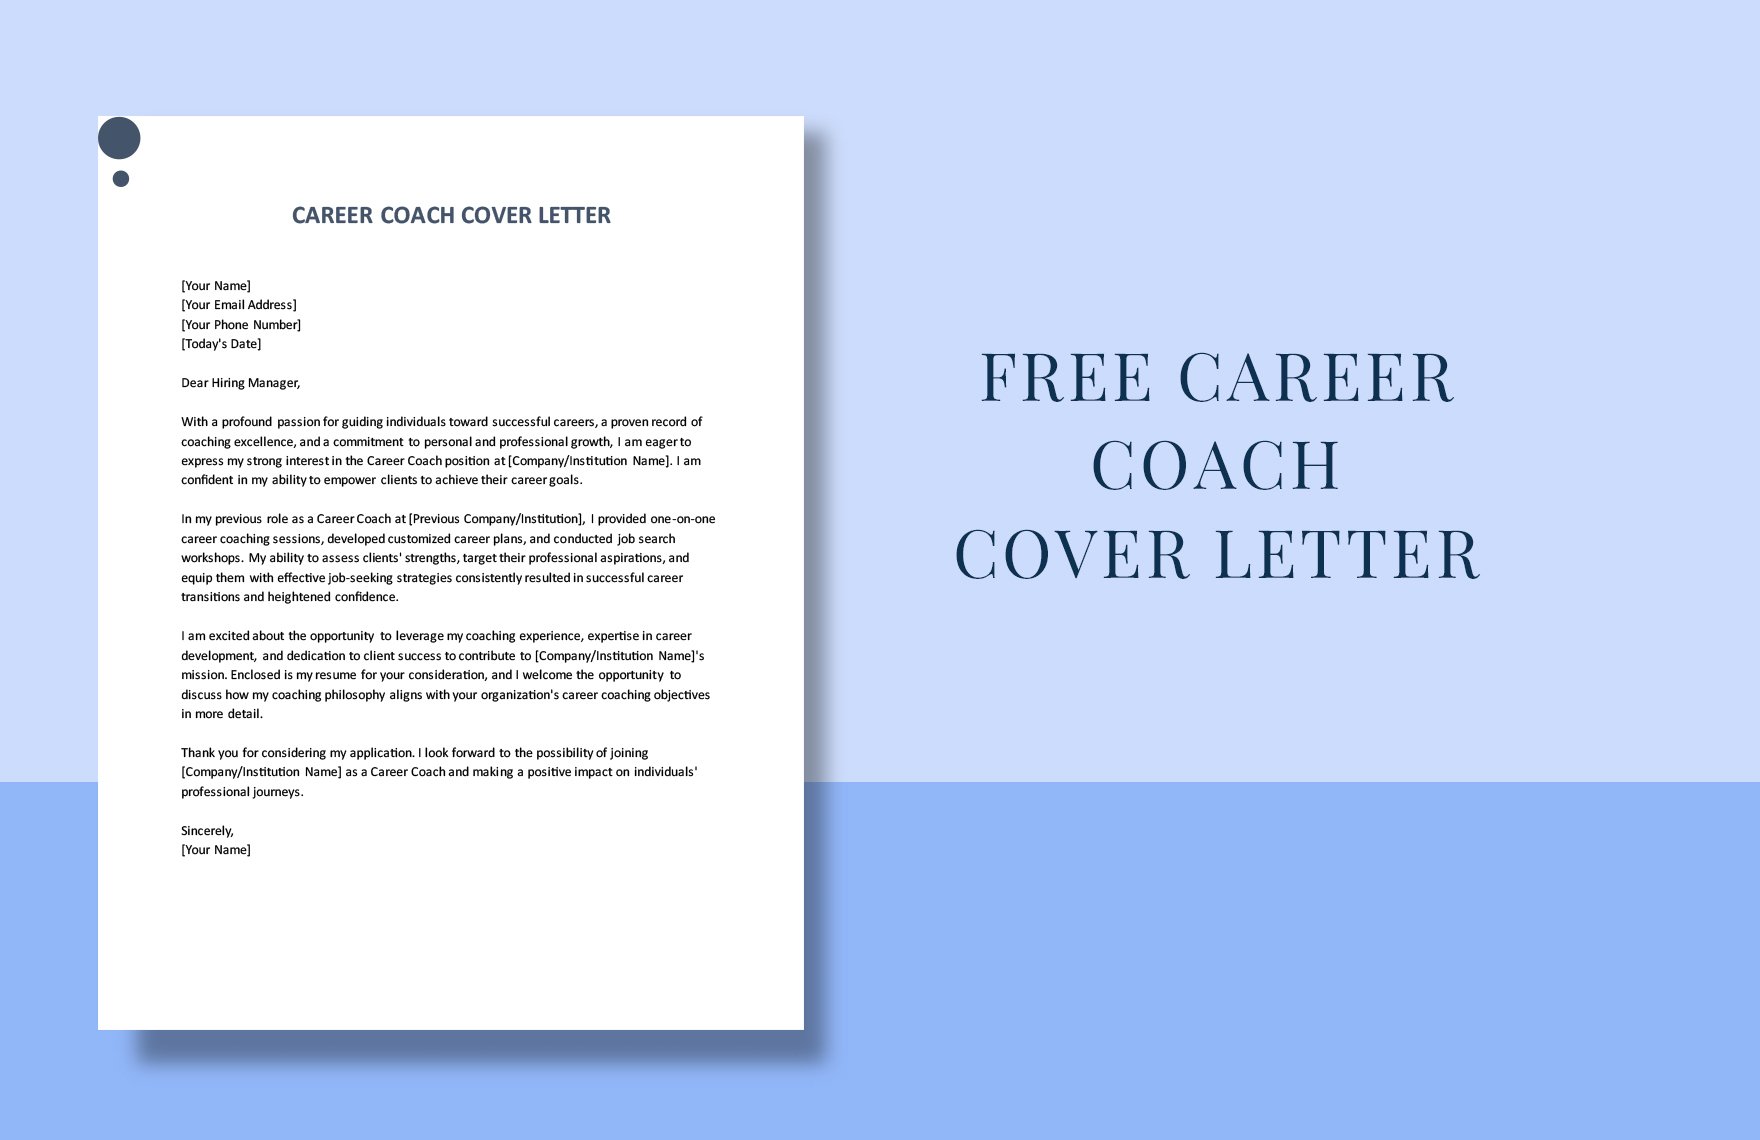 Career Coach Cover Letter in Word, Google Docs, PDF